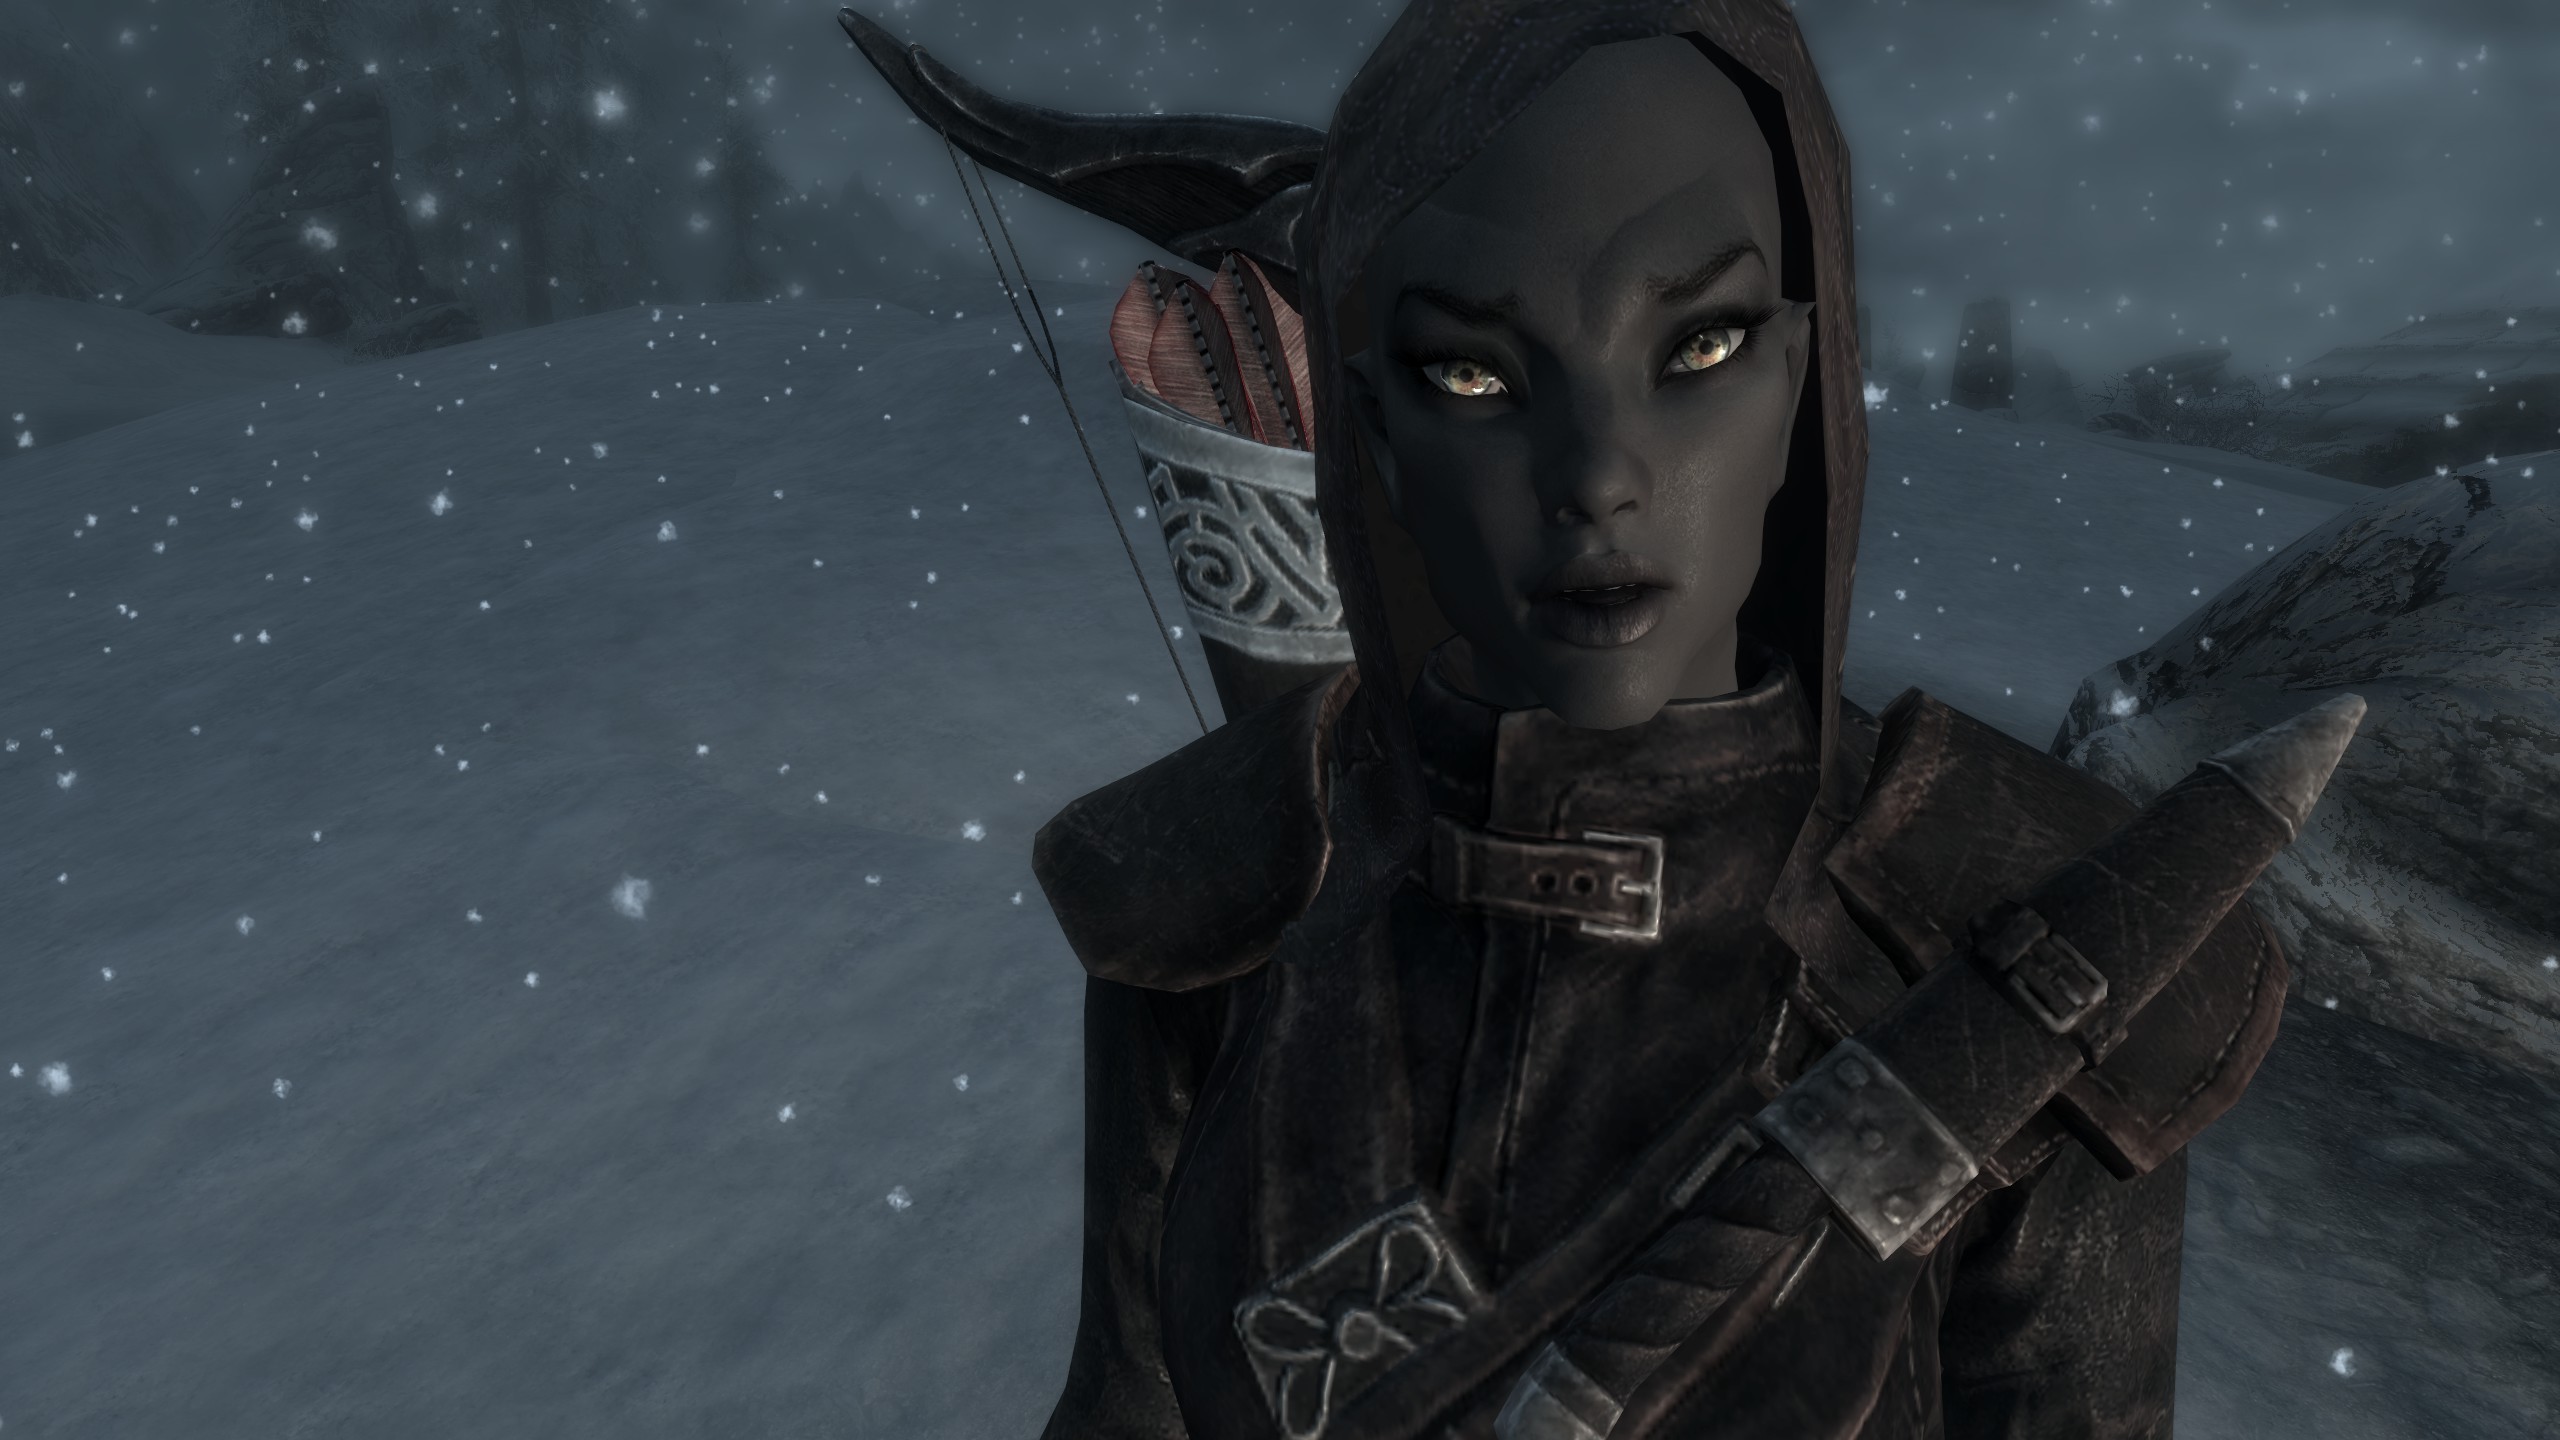 Karliah, a dark elf with nicer eyes thanks to The Eyes of Beauty, one of the best Skyrim mods